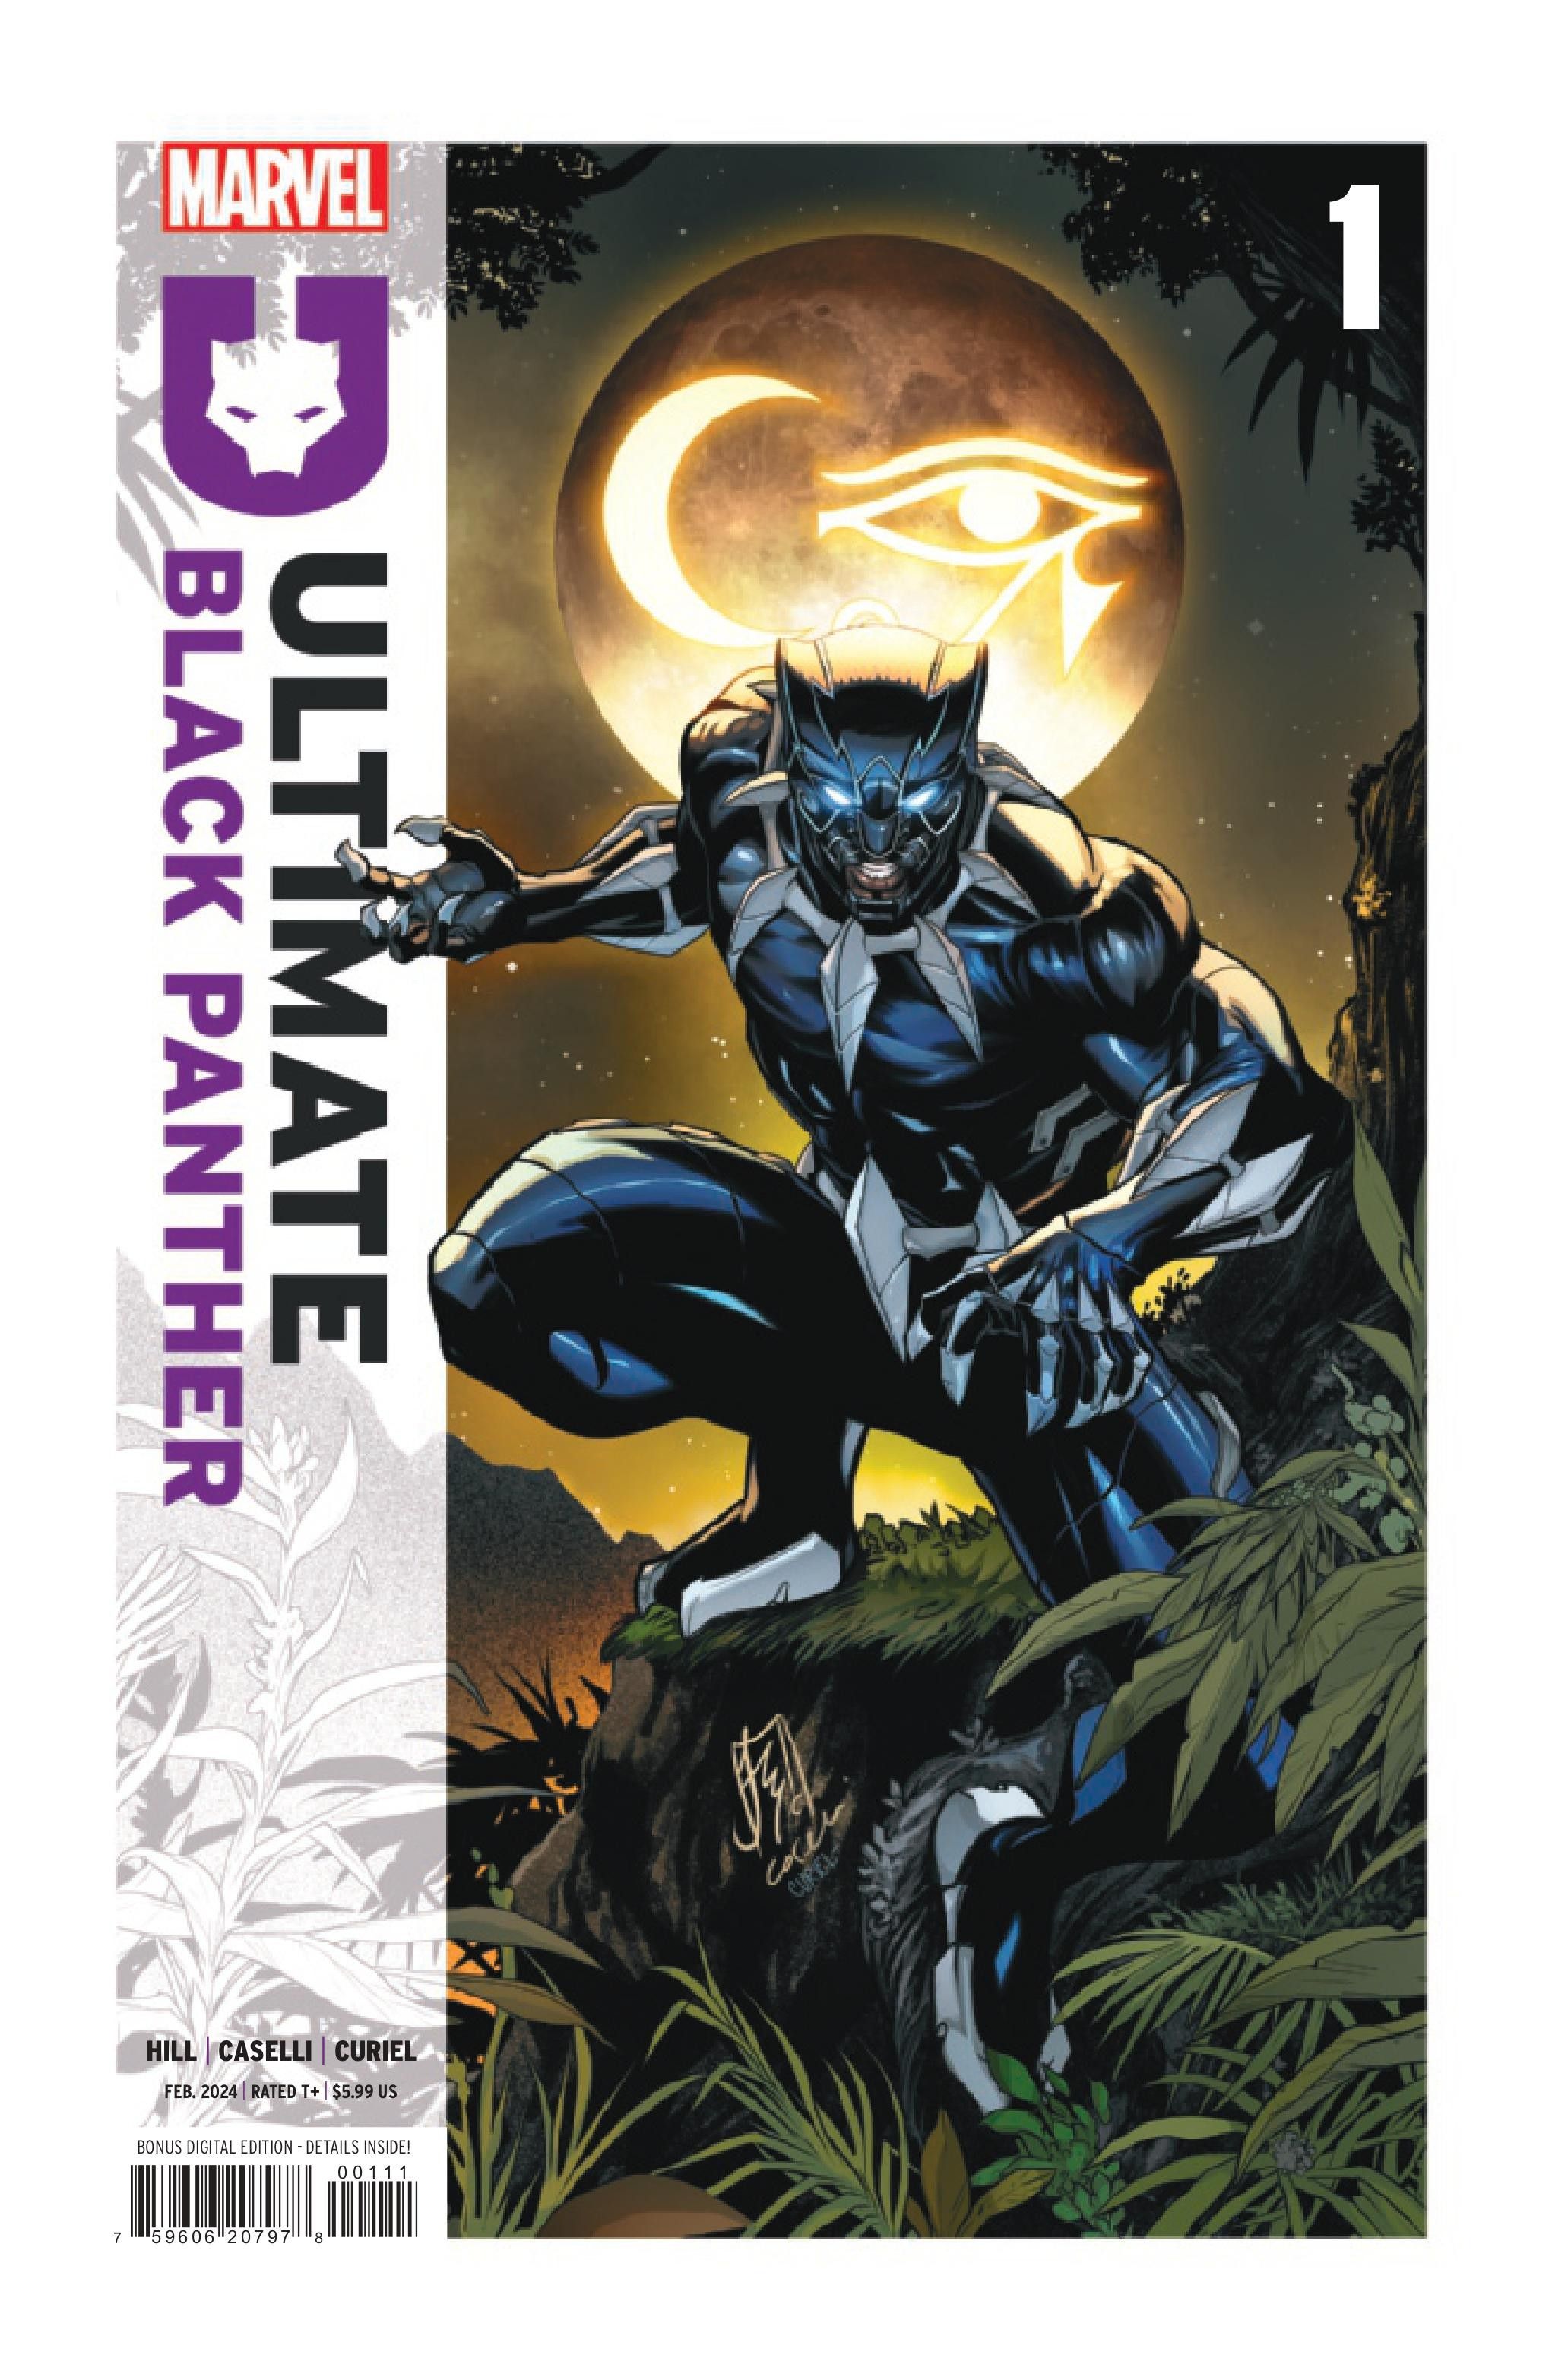 Cover for Ultimate Black Panther #1, featuring him kneeling before a moon.